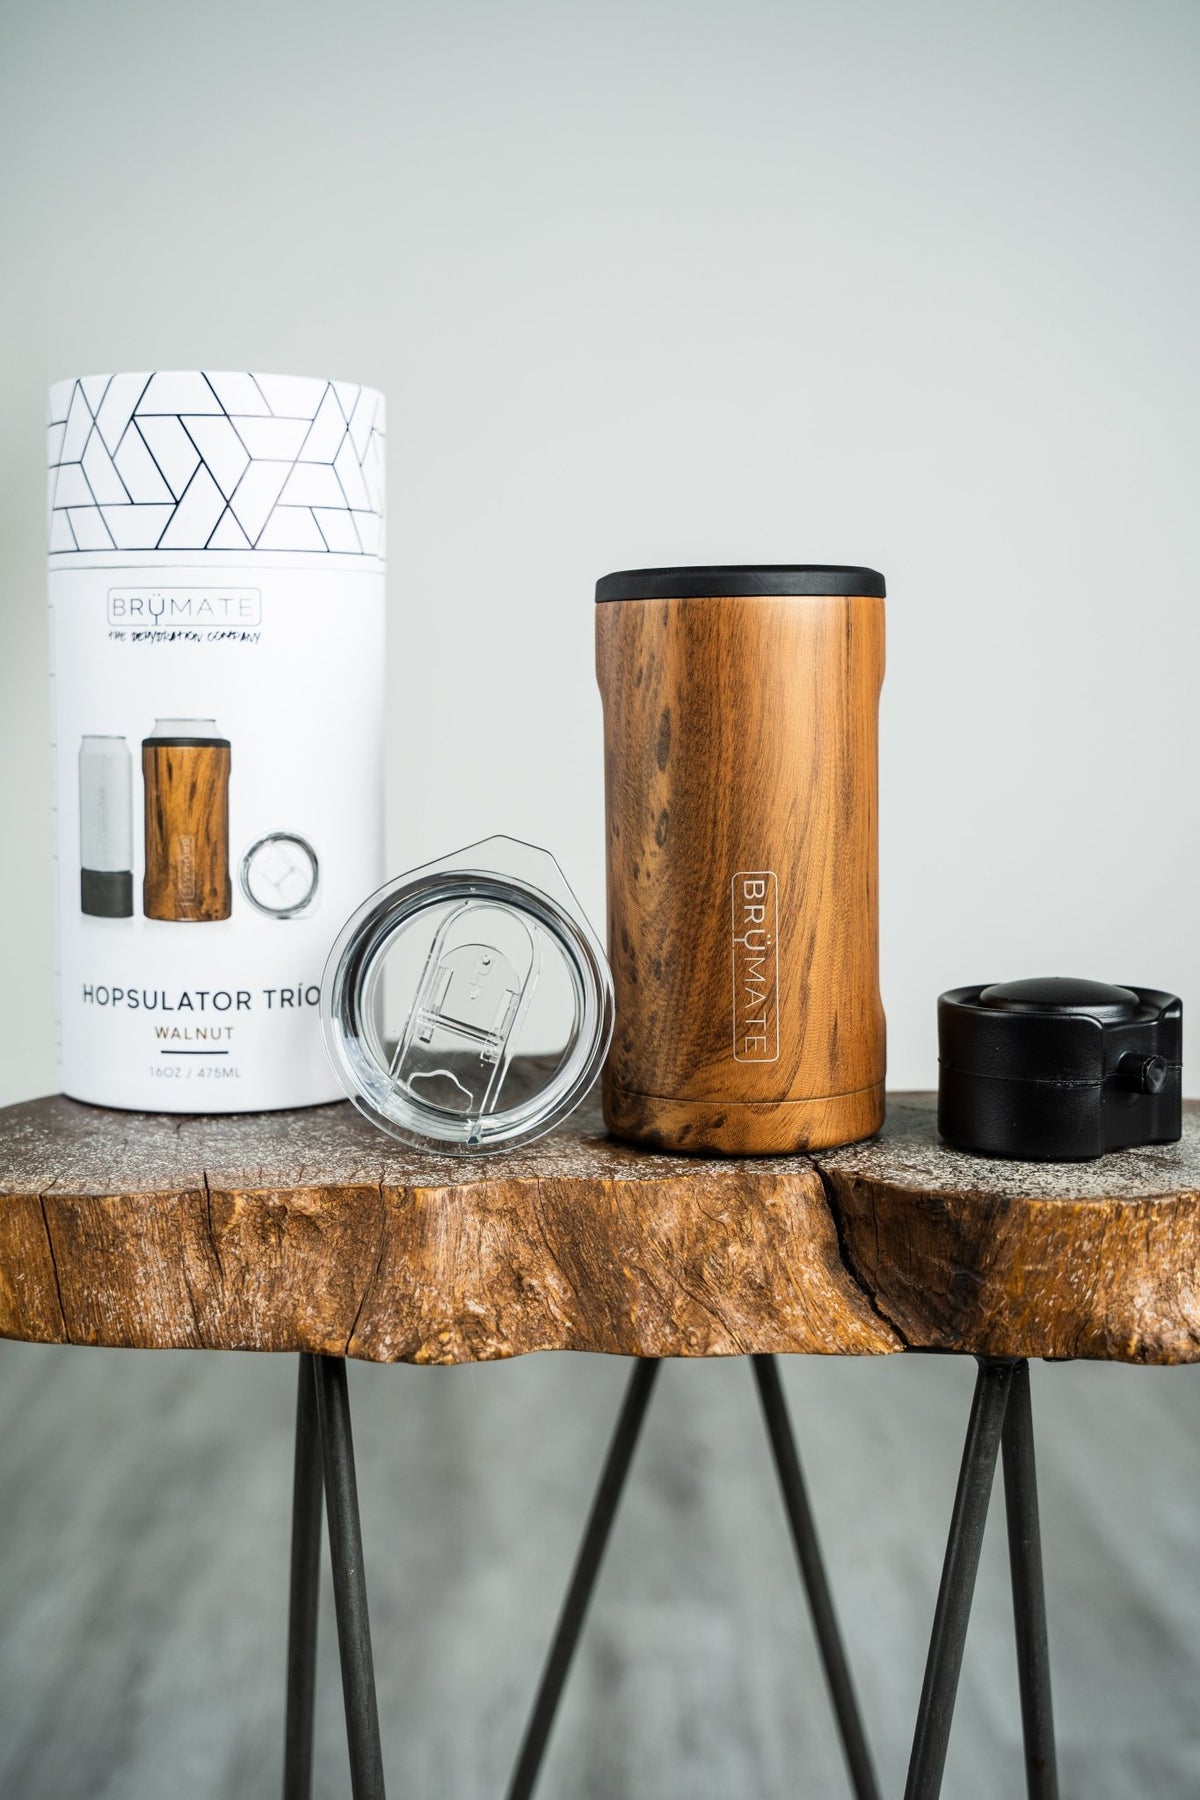 BruMate hopsulator trio 3 in 1 walnut - BruMate Drinkware, Tumblers and Insulated Can Coolers at Lush Fashion Lounge Trendy Boutique in Oklahoma City